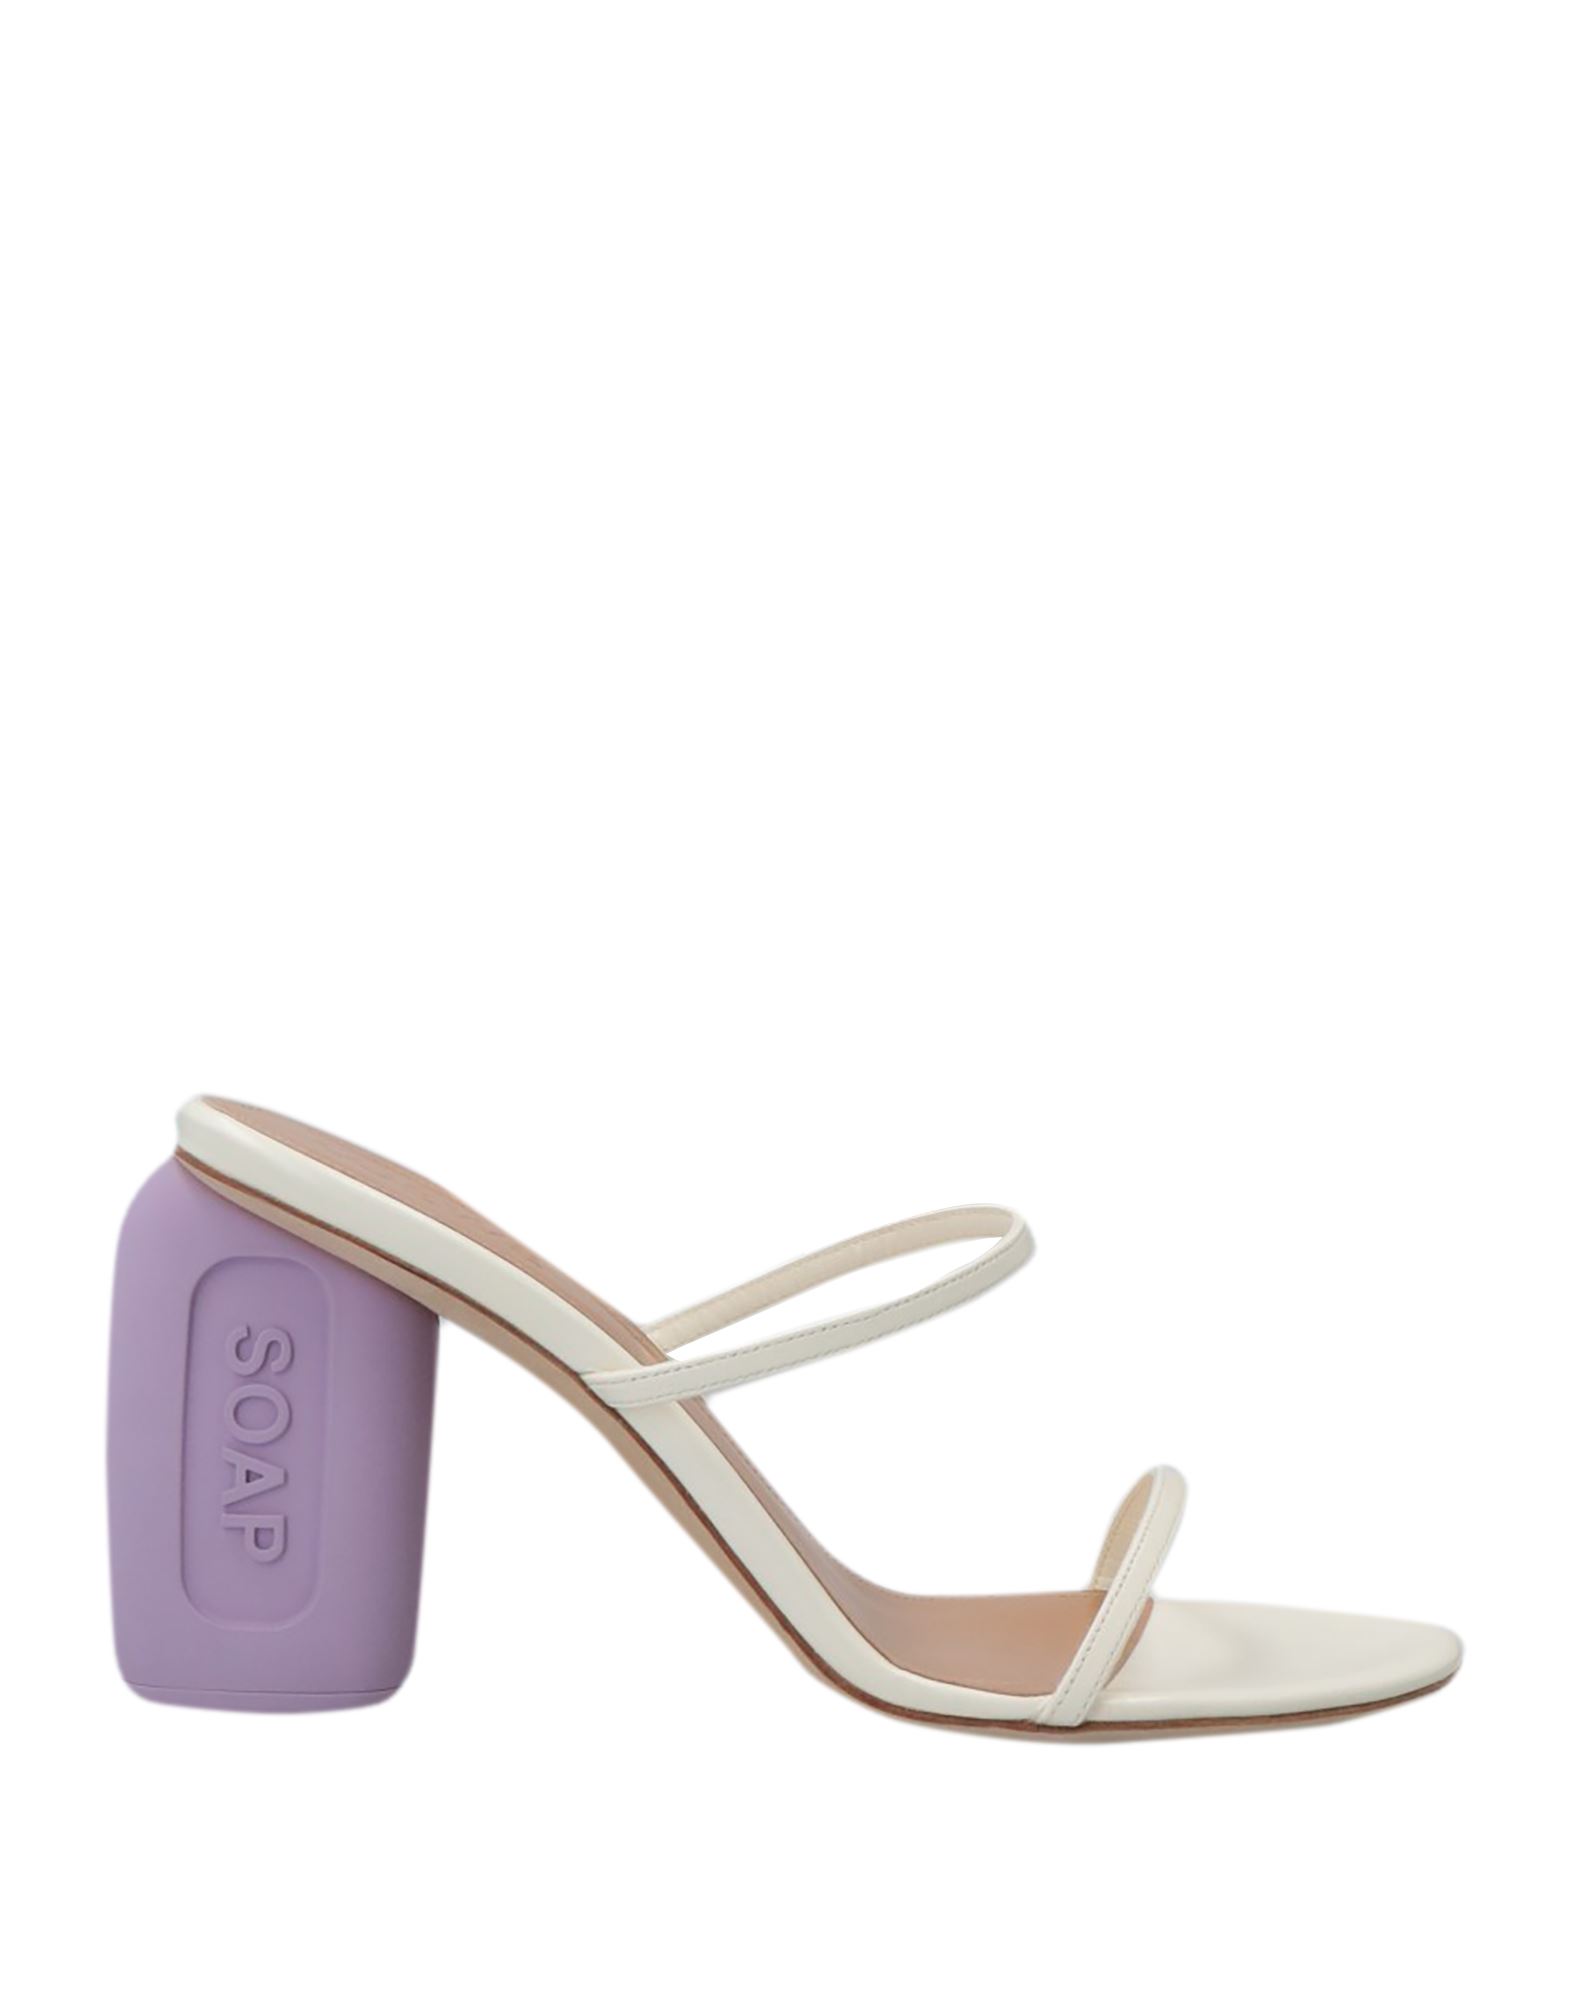 Shop Loewe Woman Sandals Ivory Size 6 Soft Leather